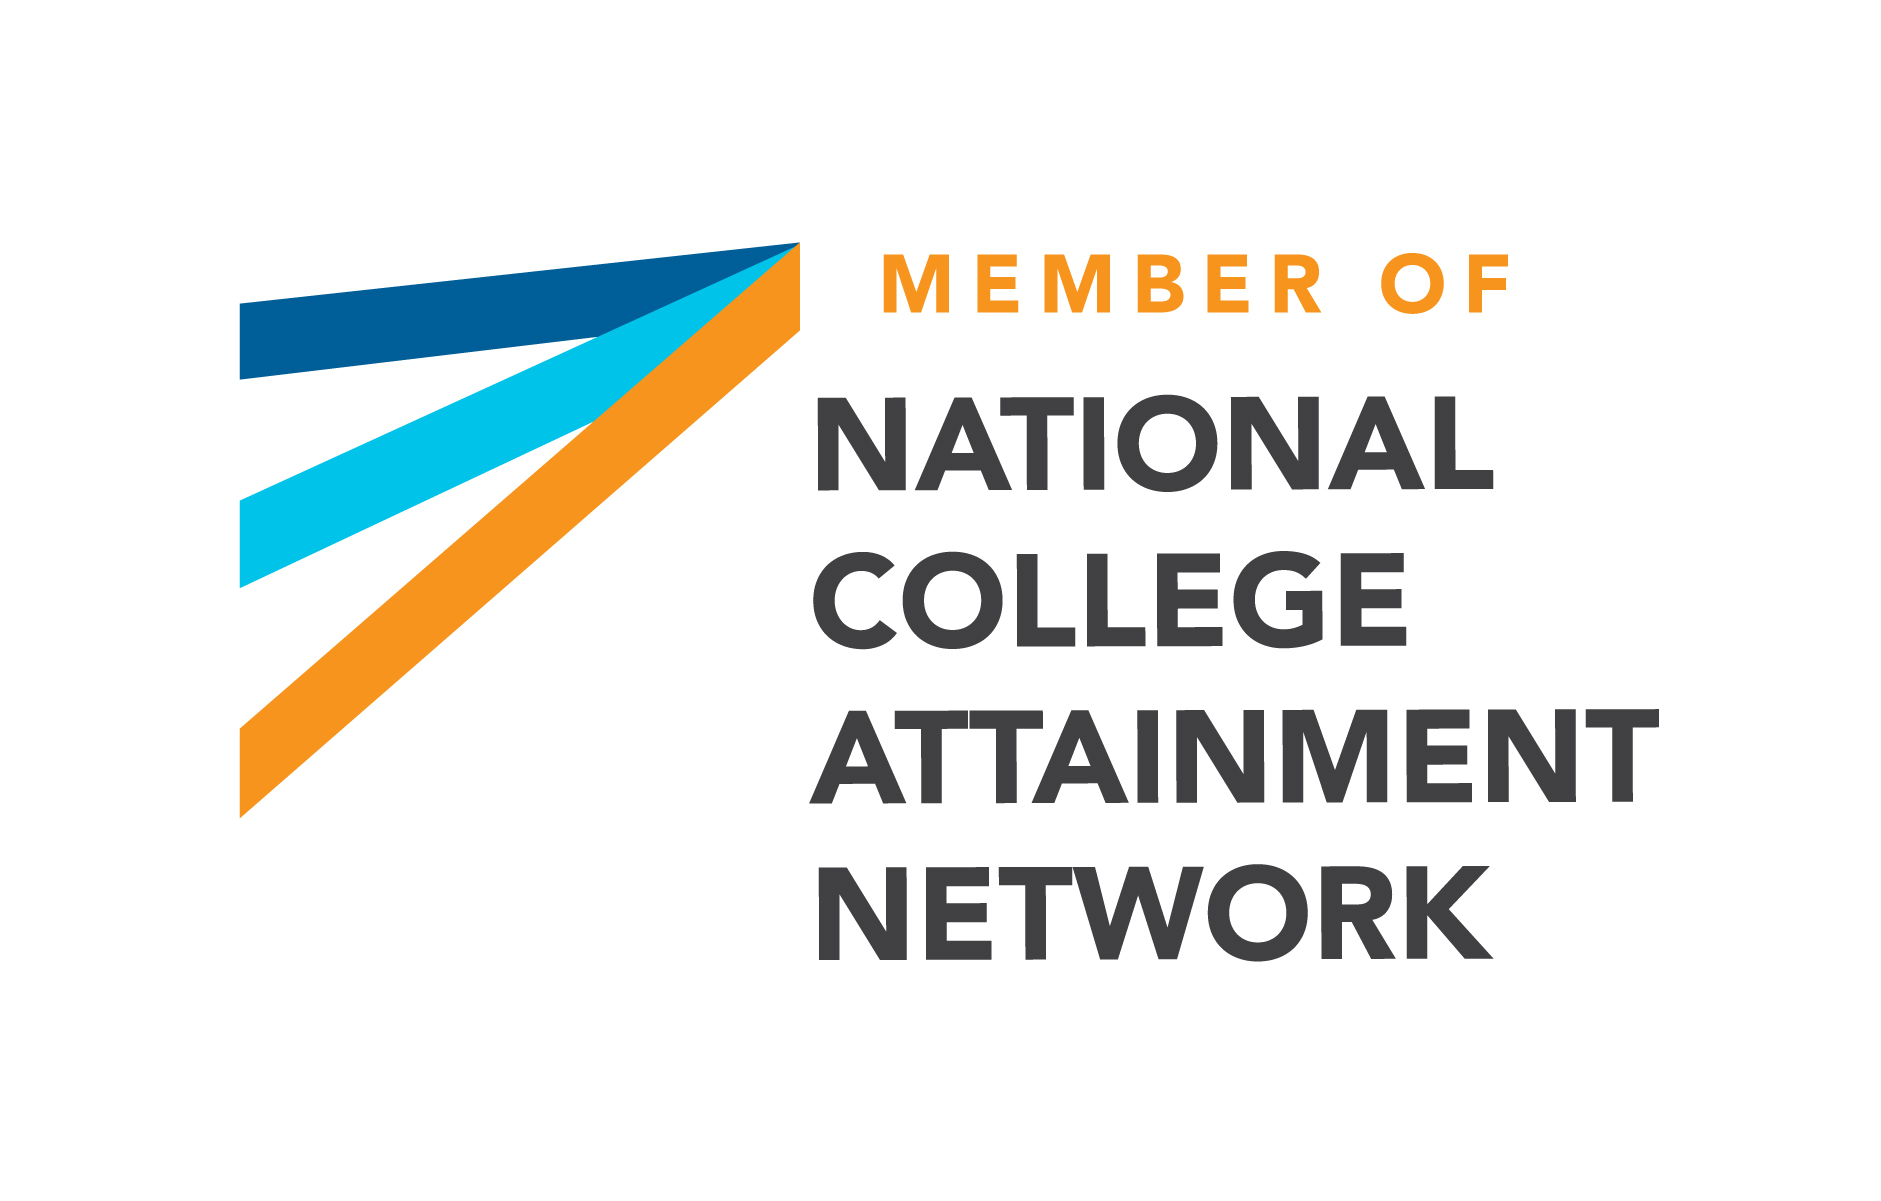 OK-CAN is a Member of the National College Access Network, logo shown here